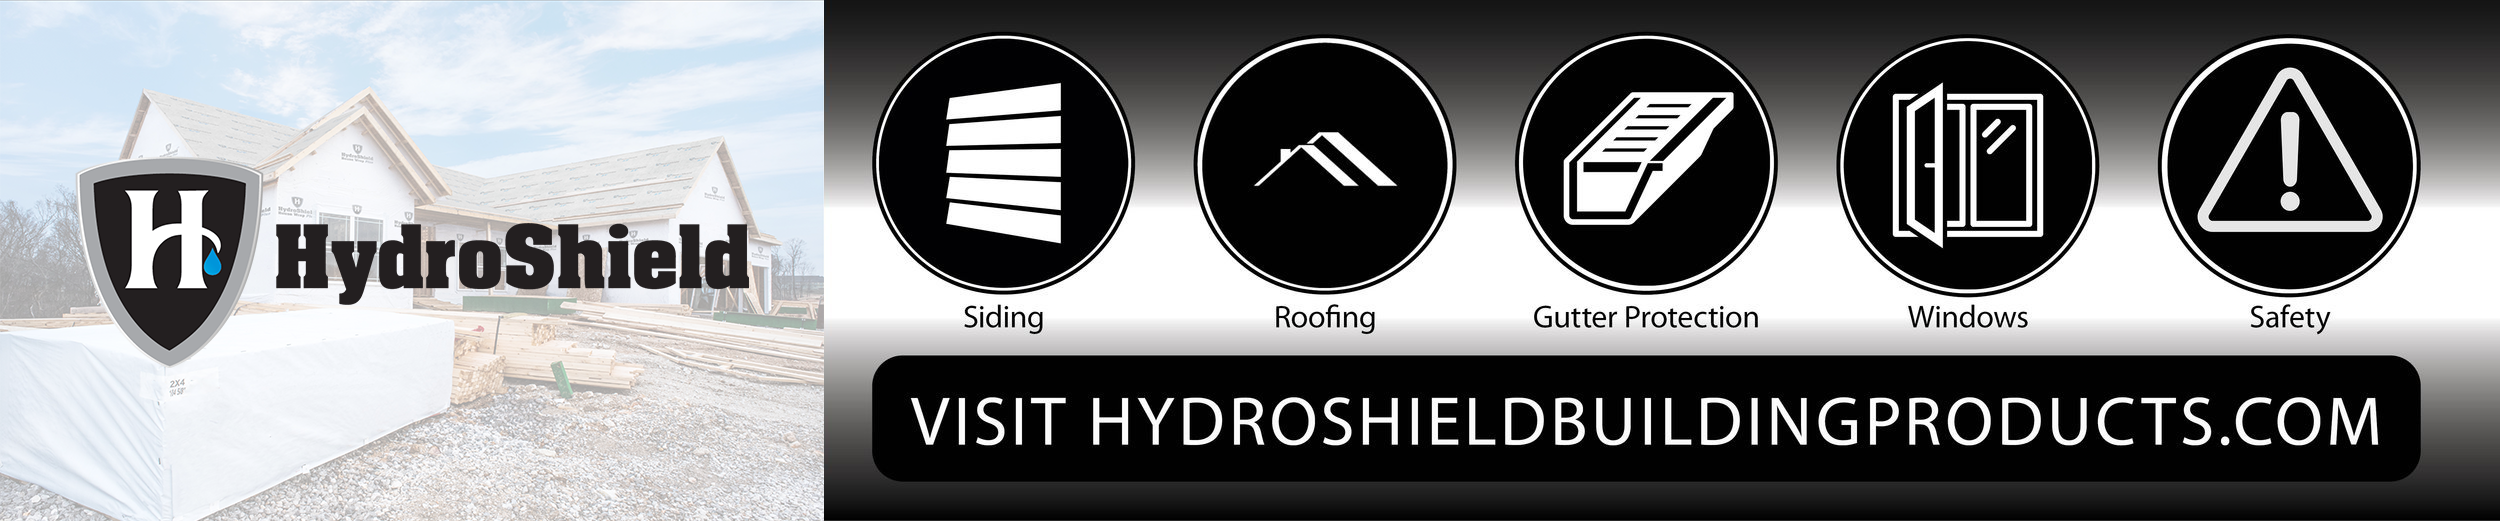 Hydroshield Building Products Banner